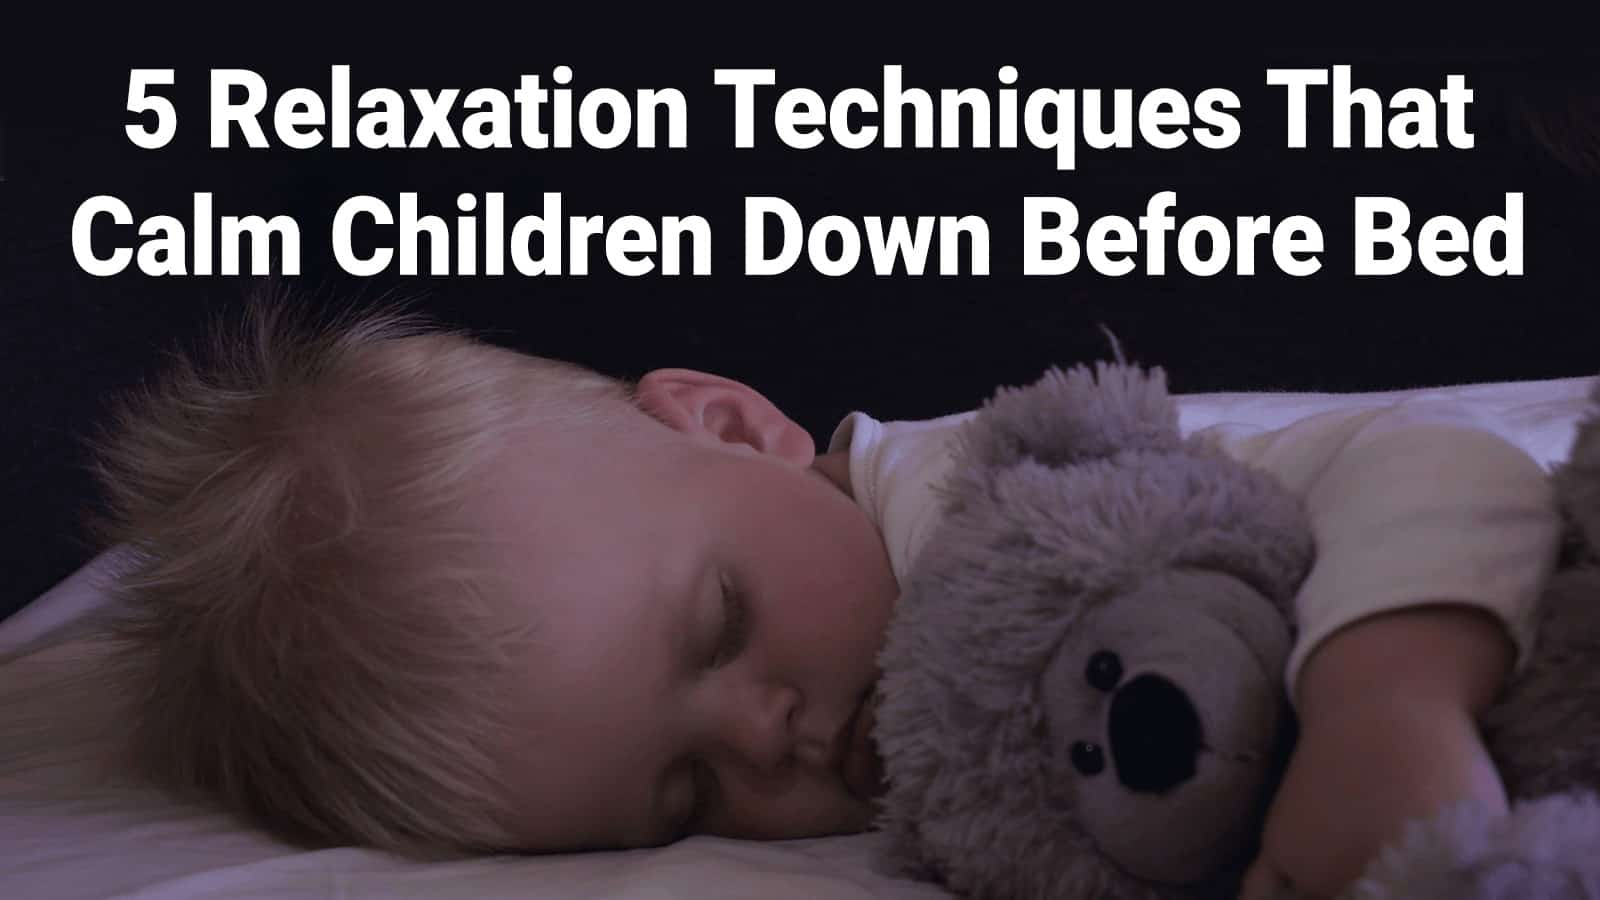 5 Relaxation Techniques That Calm Children Down Before Bed